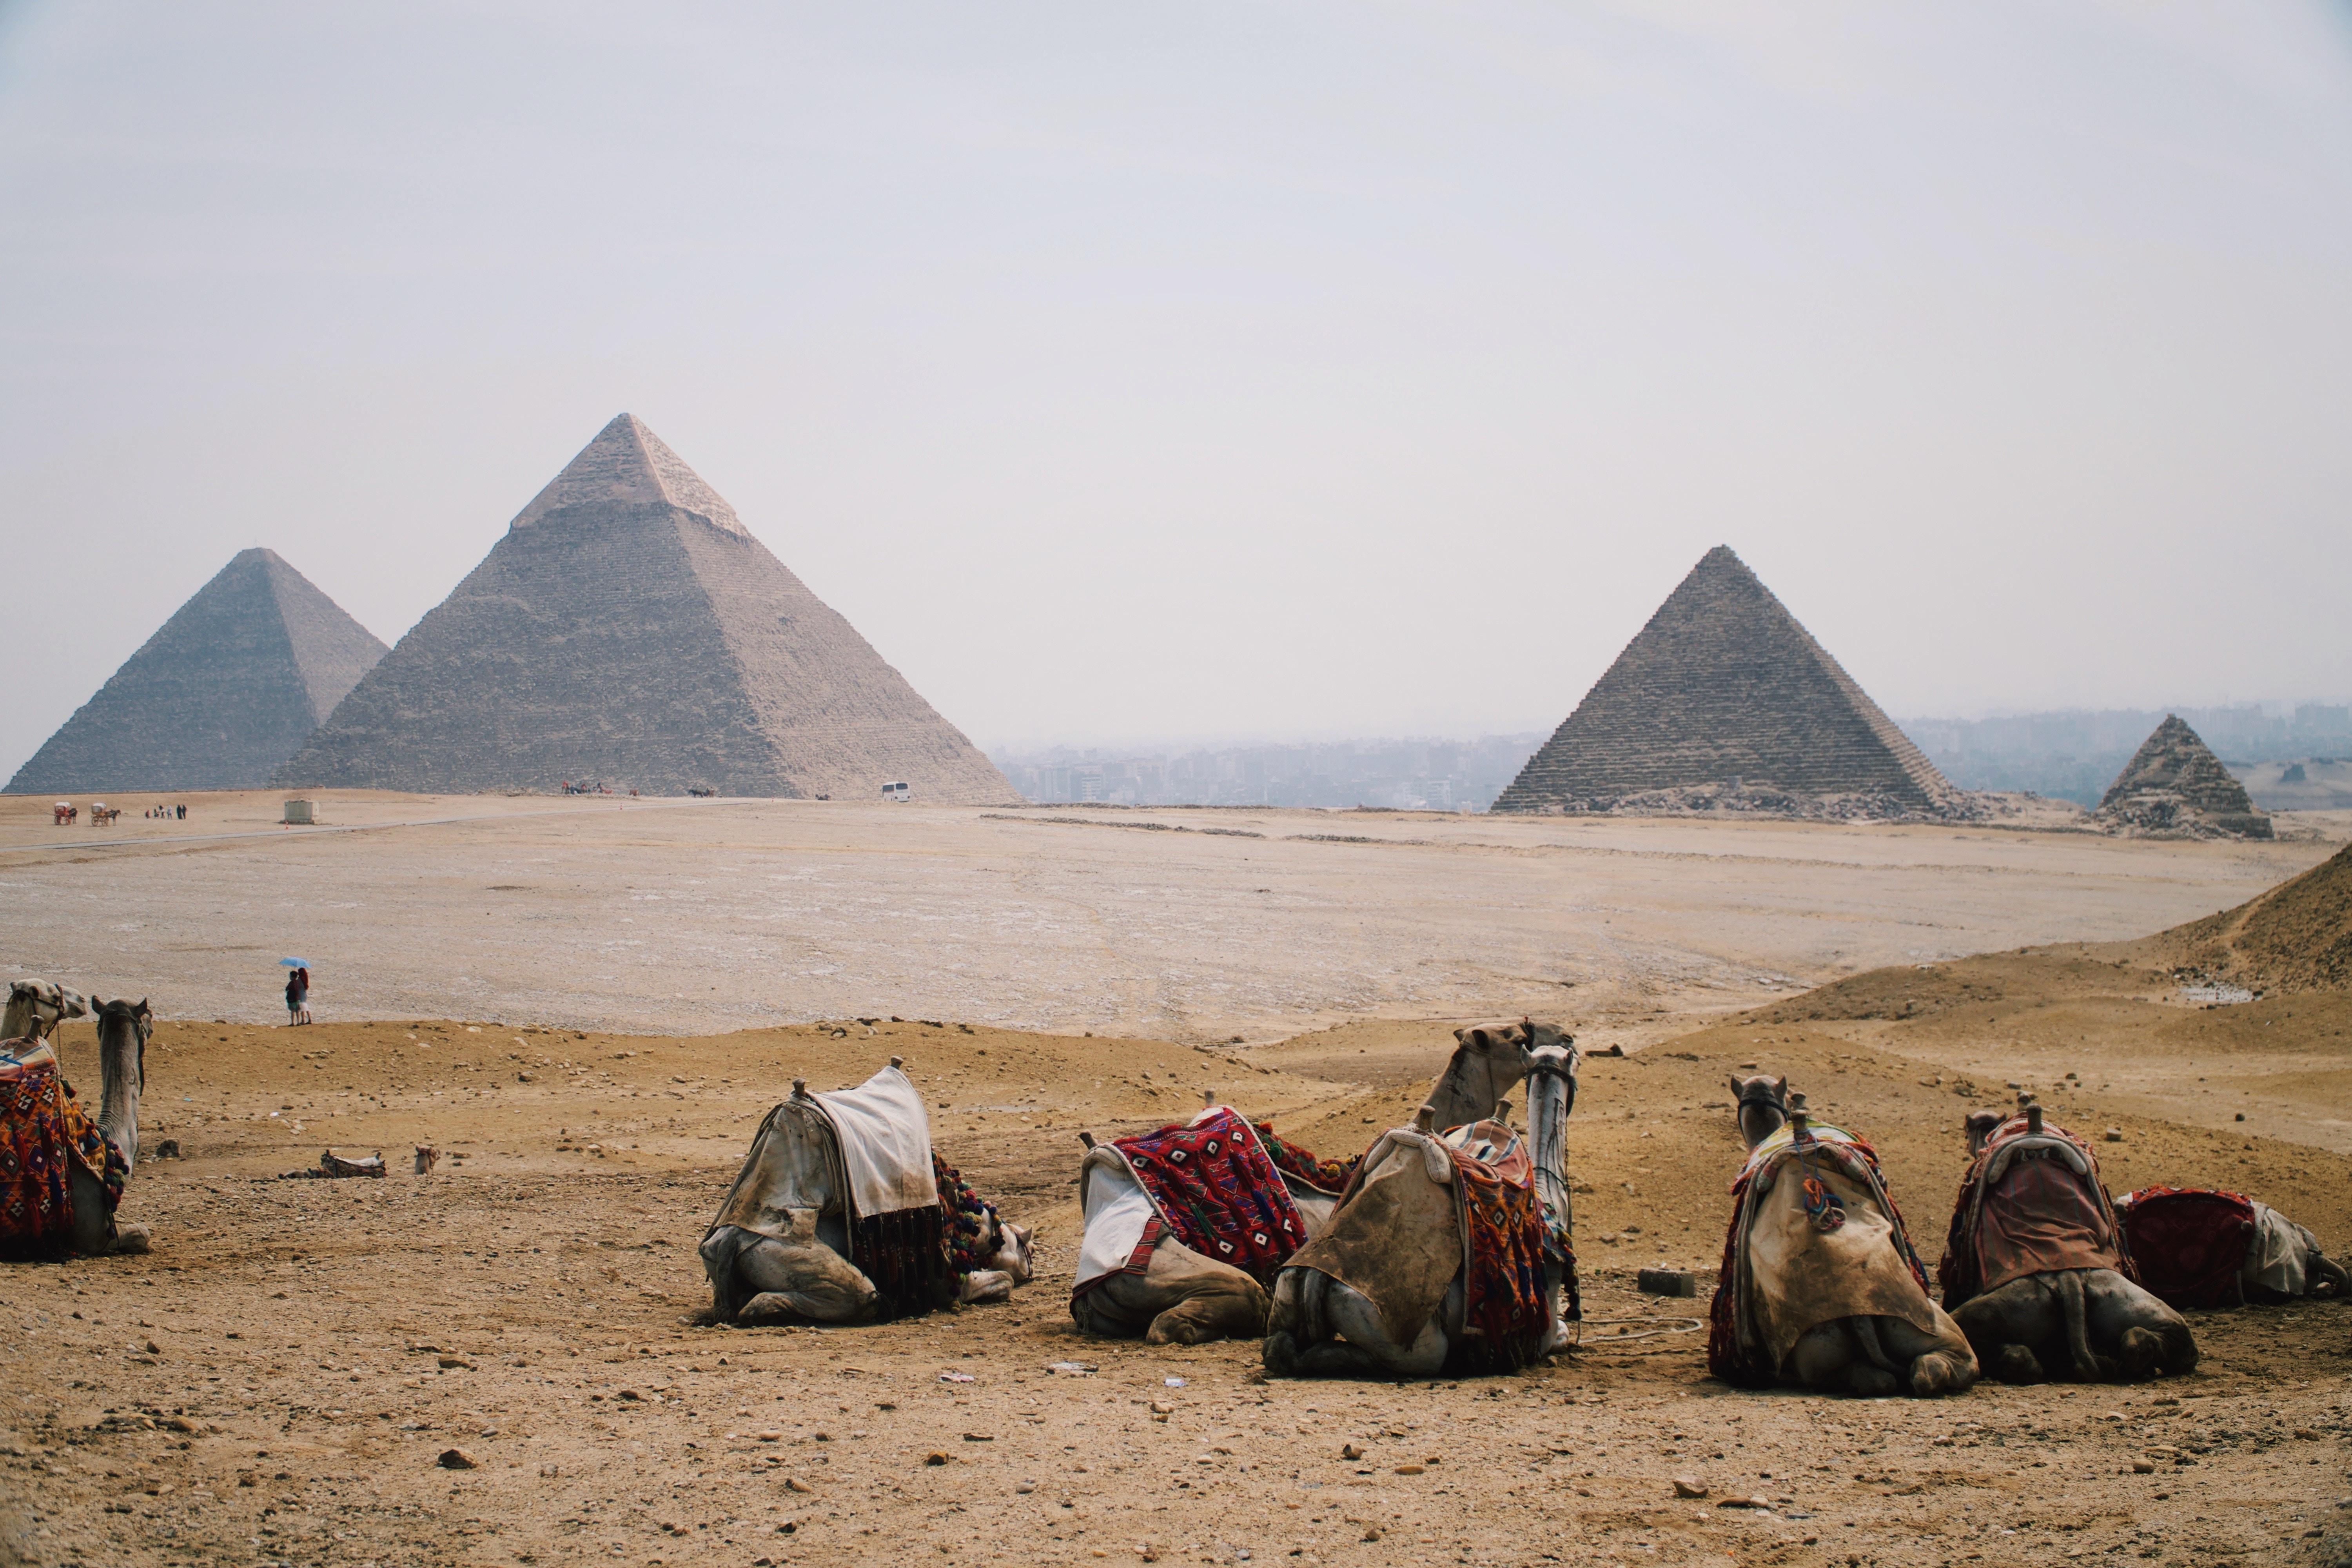 beyond the nile tours reviews